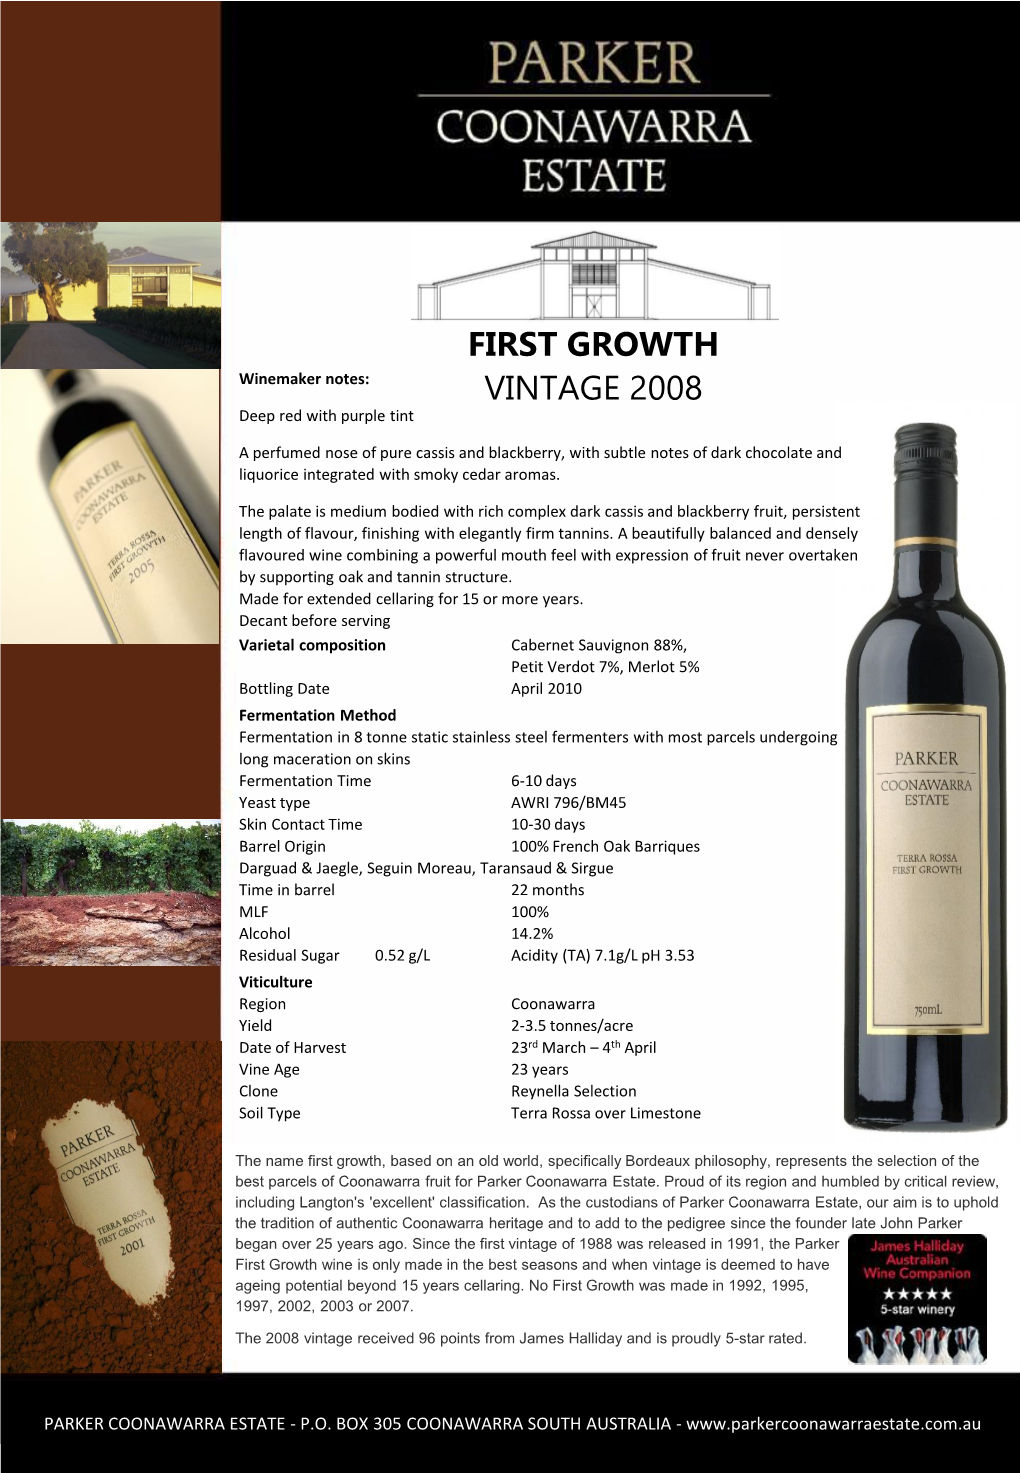 First Growth Vintage 2008 Media Reviews